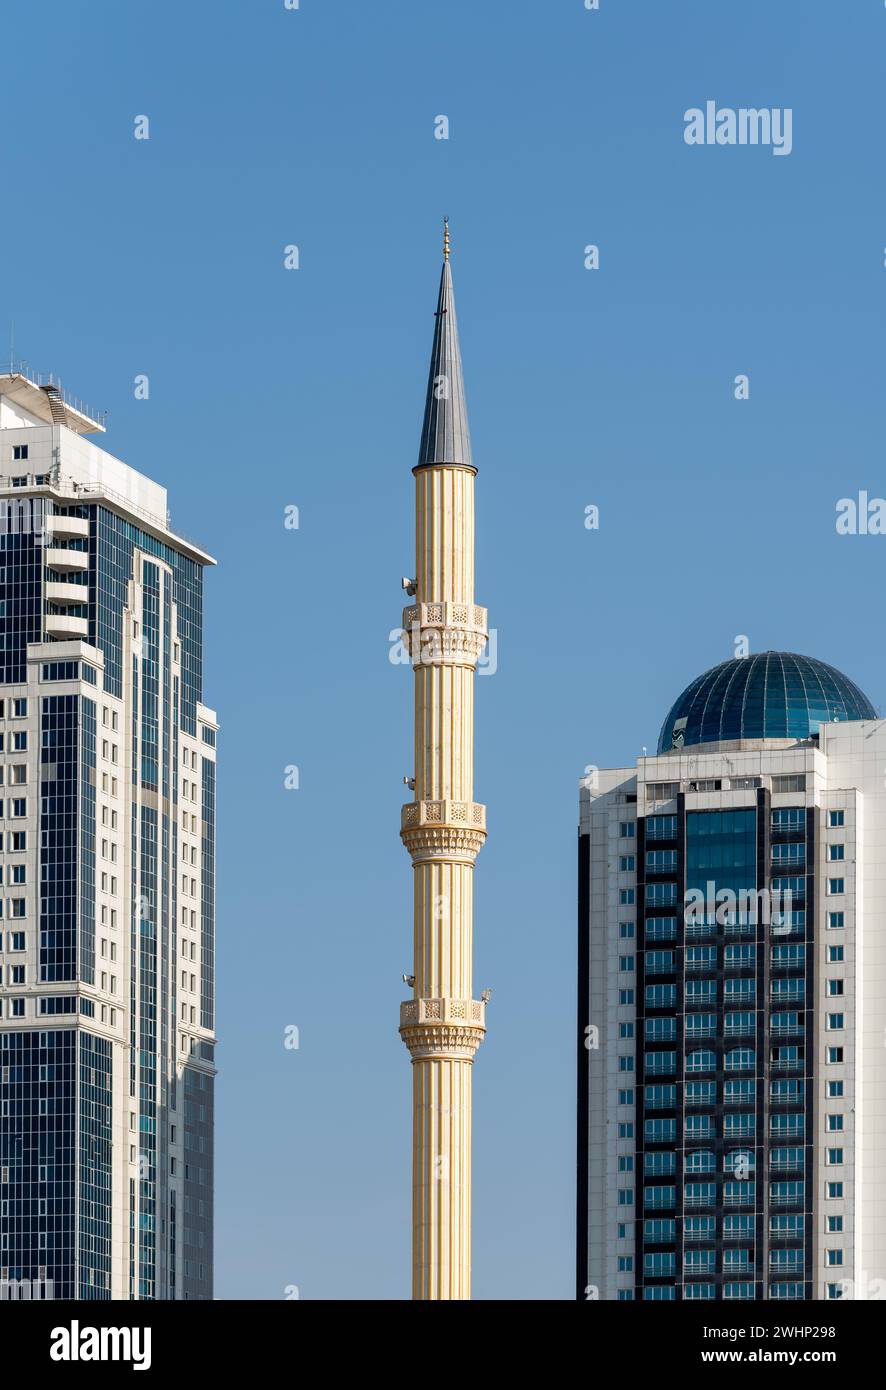 Minaret of traditional Islamic mosque and tall modern skyscrapers in Grozny Chechnya Stock Photo